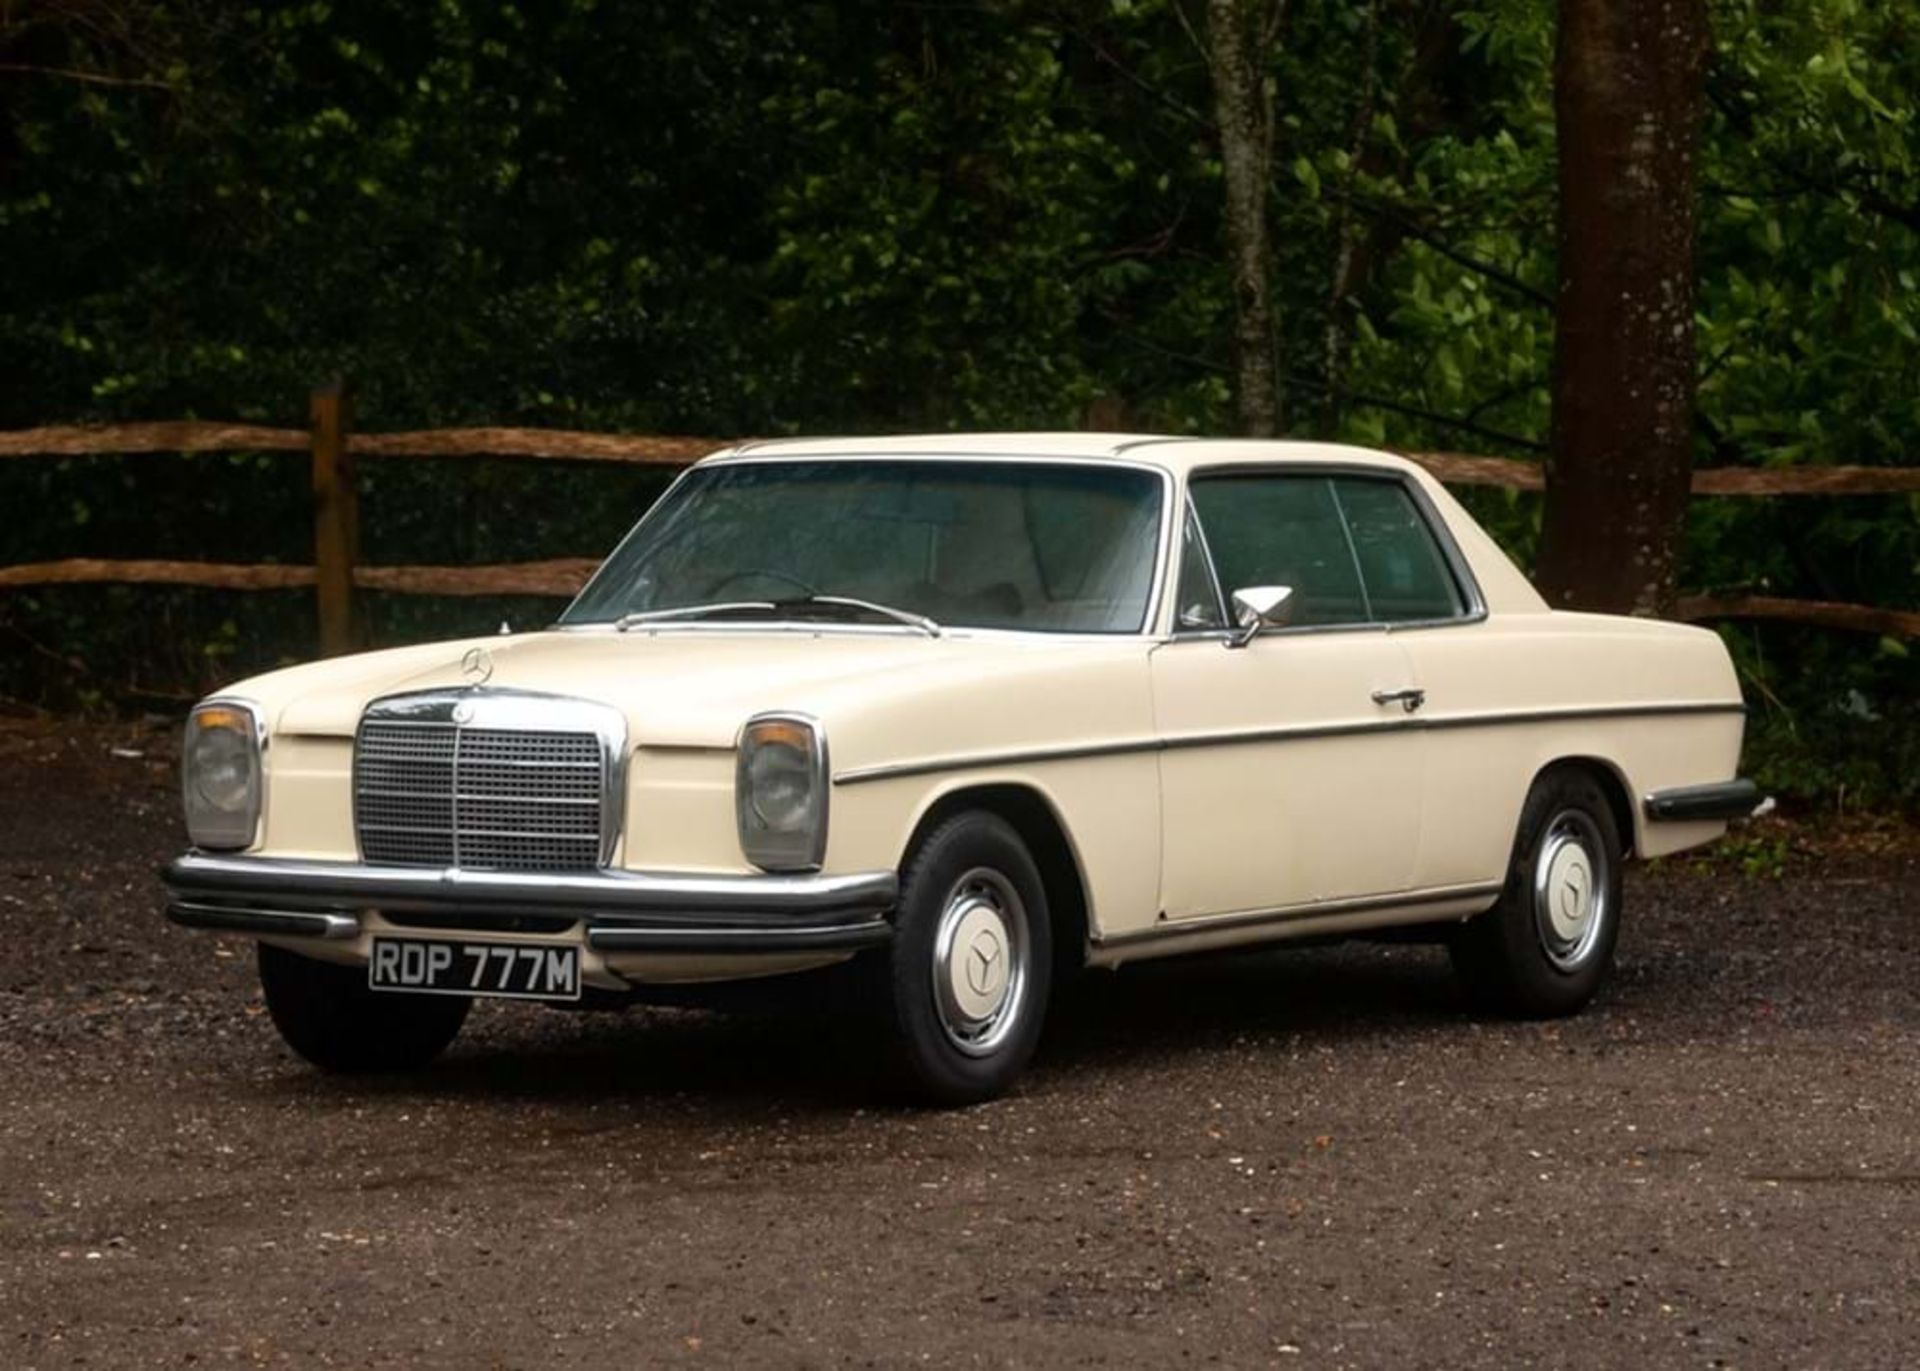 1973 Mercedes-Benz 280CE €œFrom the Cheesbrough collection€ - Image 7 of 7